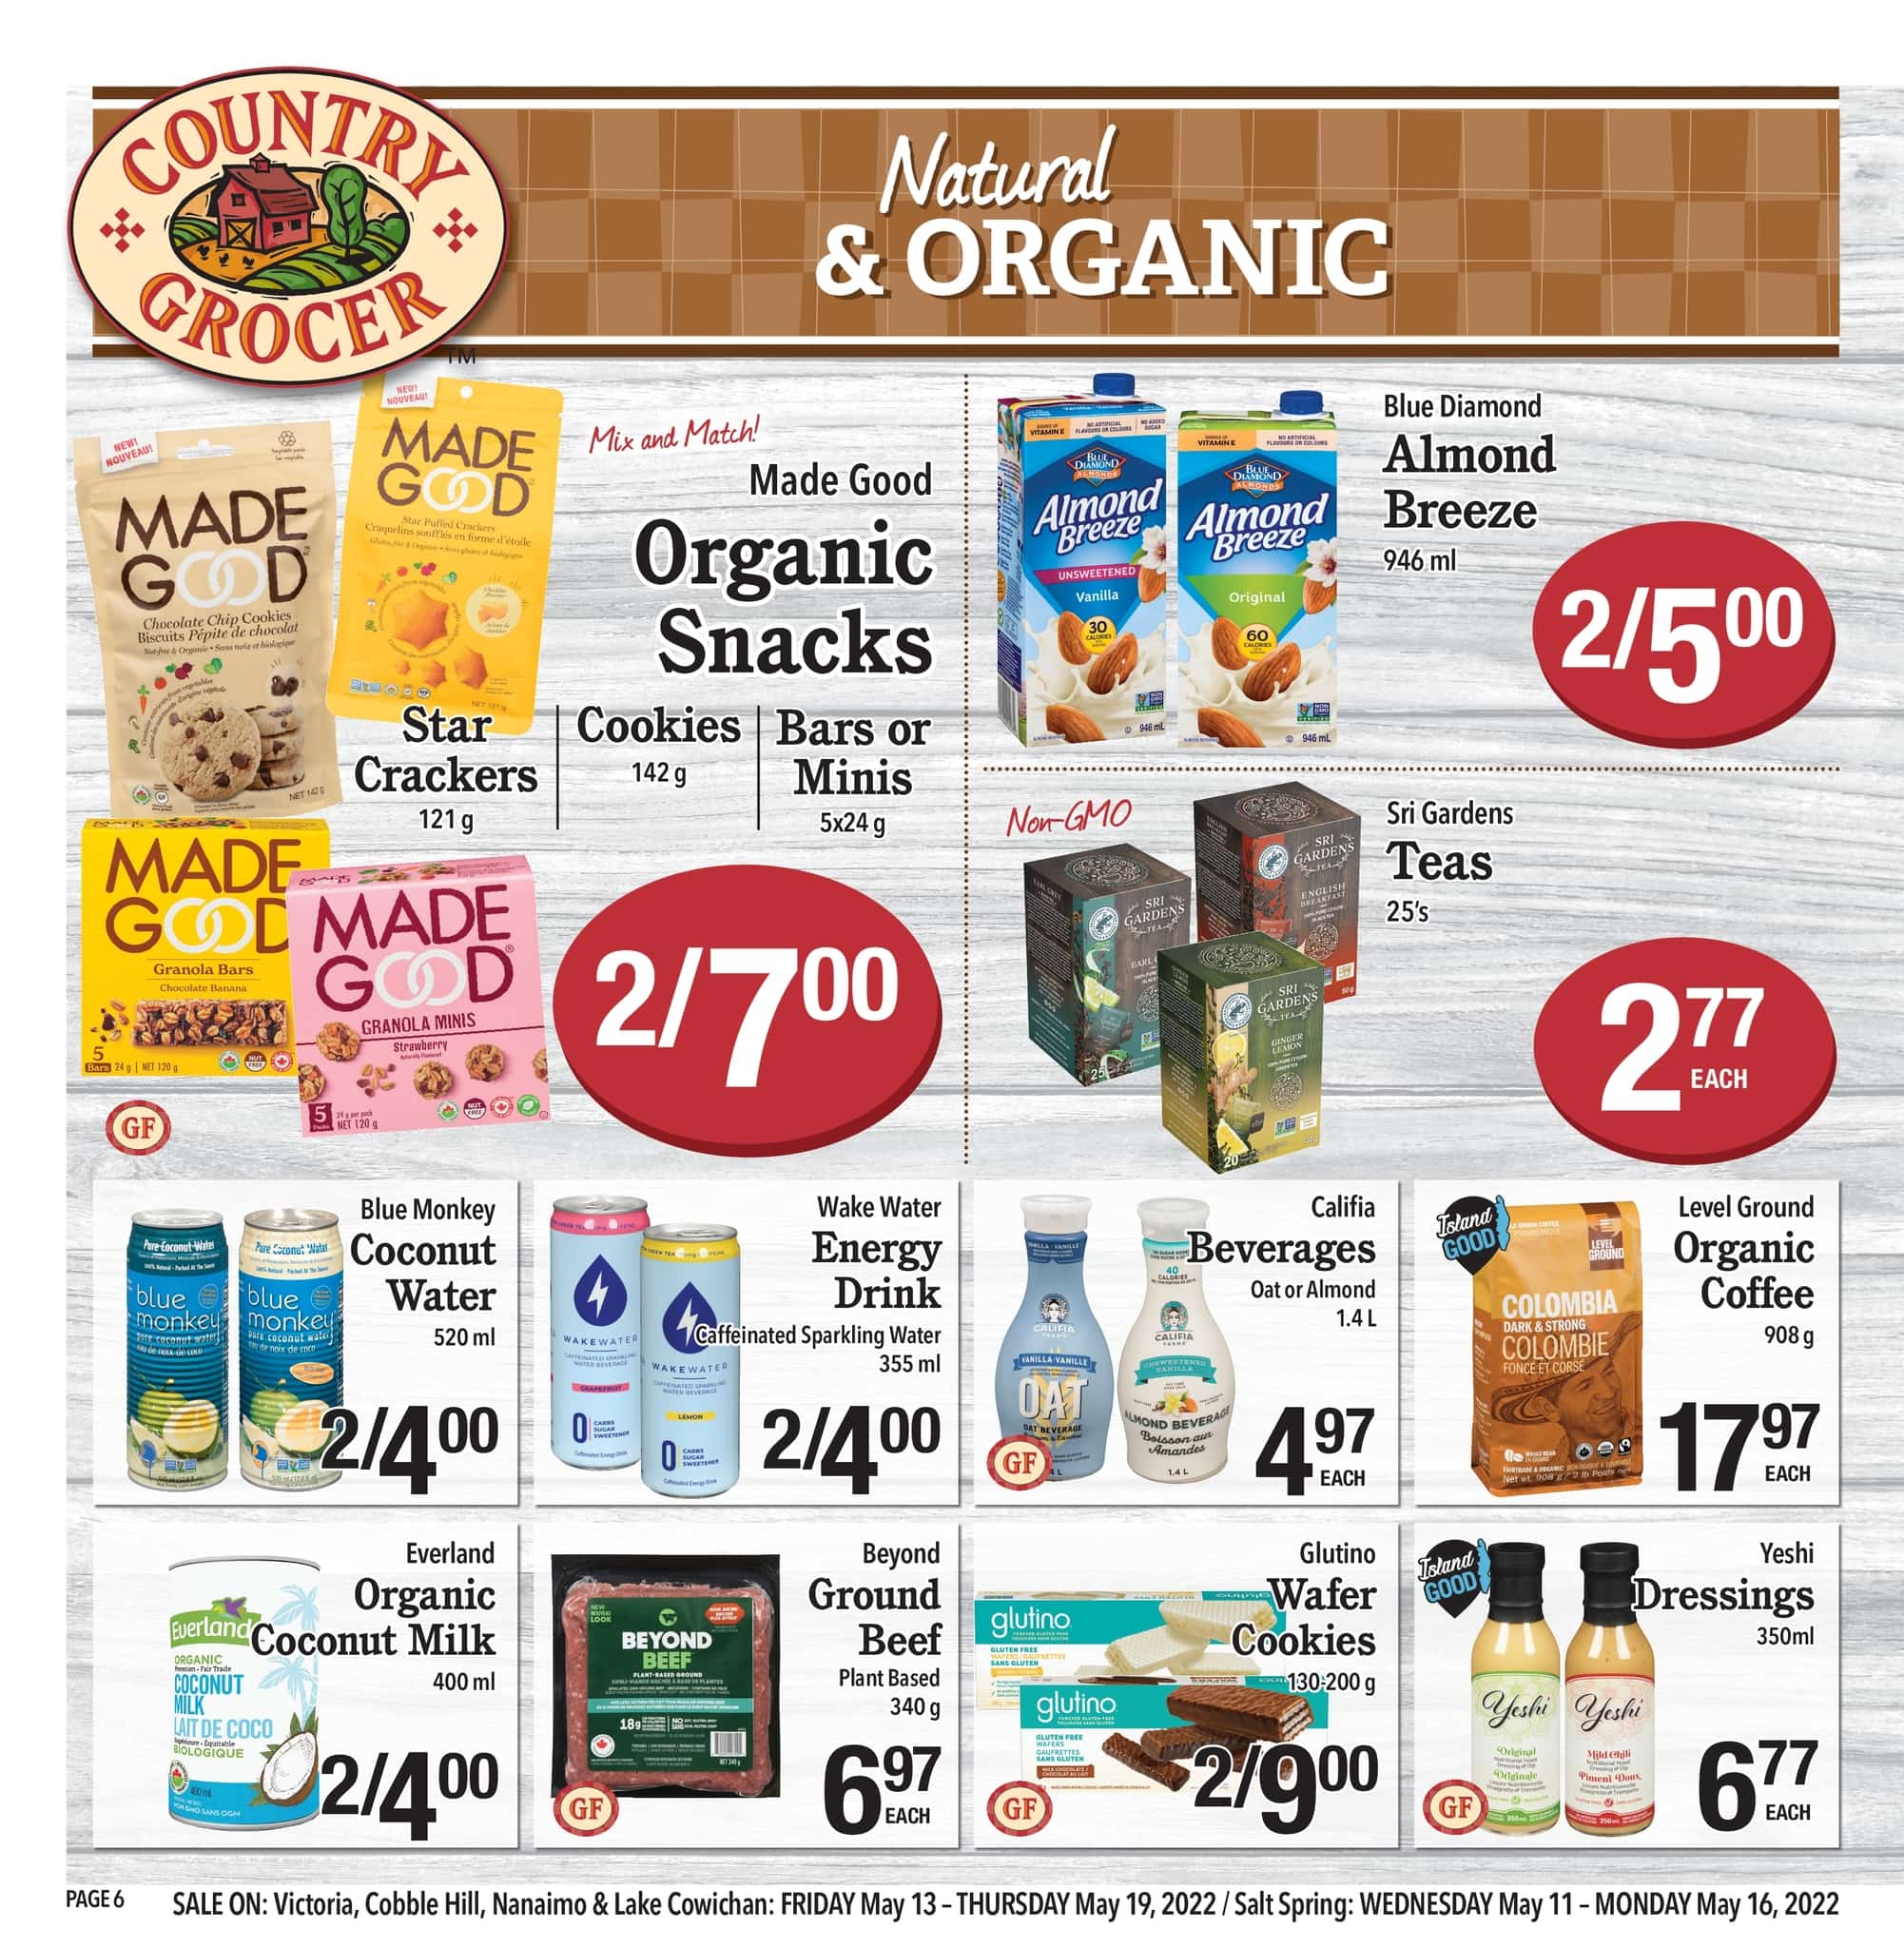 Country Grocer - Weekly Flyer Specials - Page 6